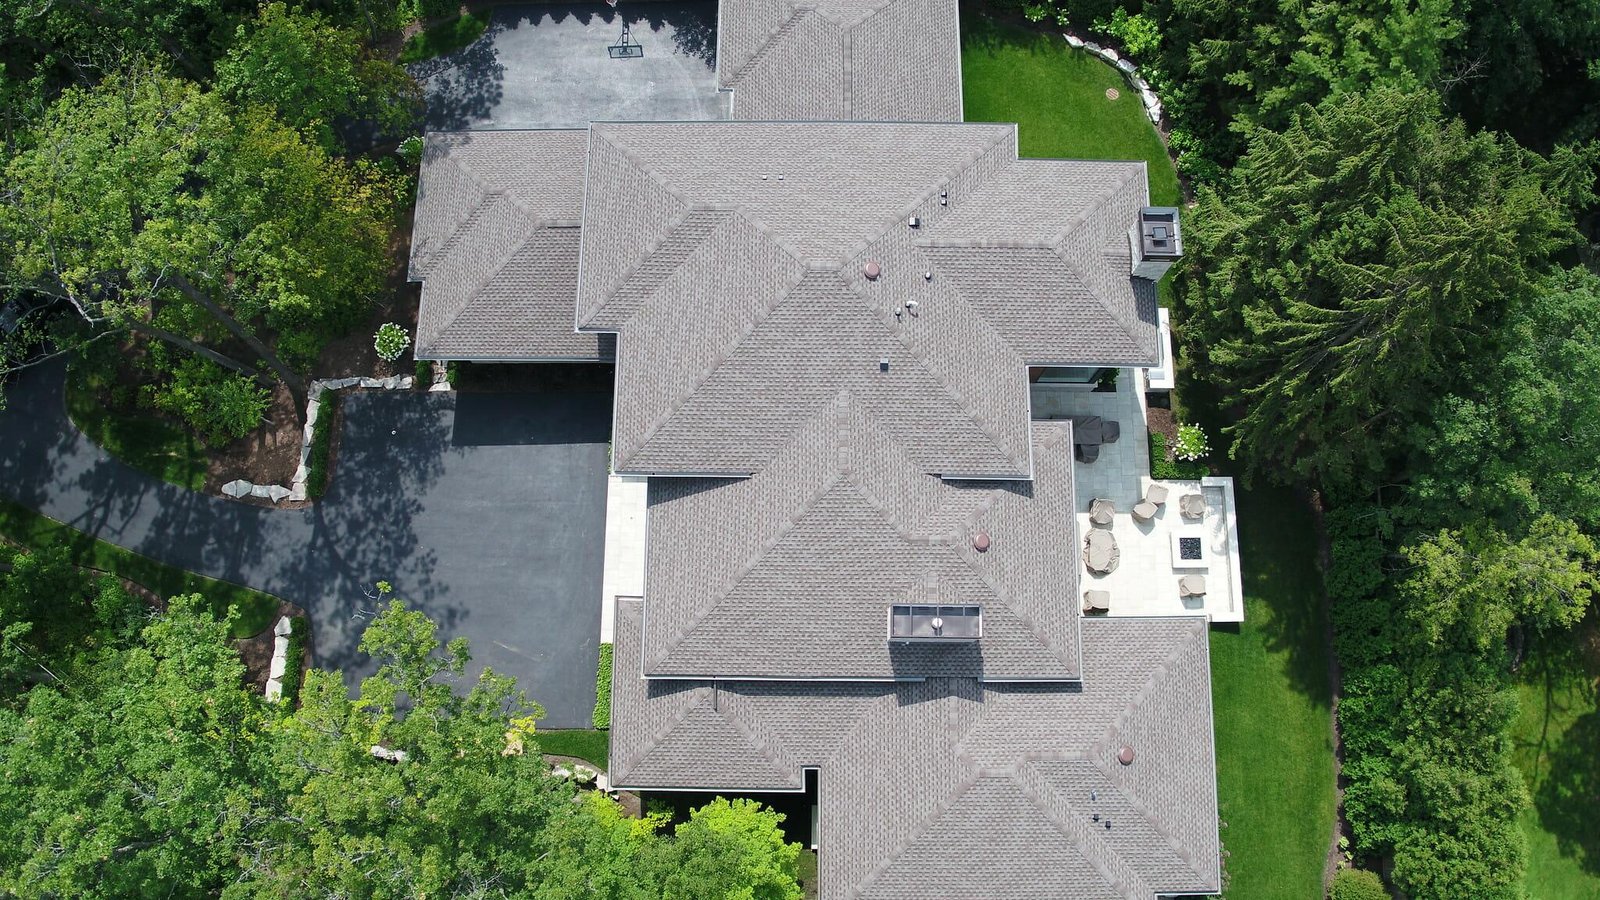 Project by Roofing Professional A.B. Edward Enterprises, Inc.